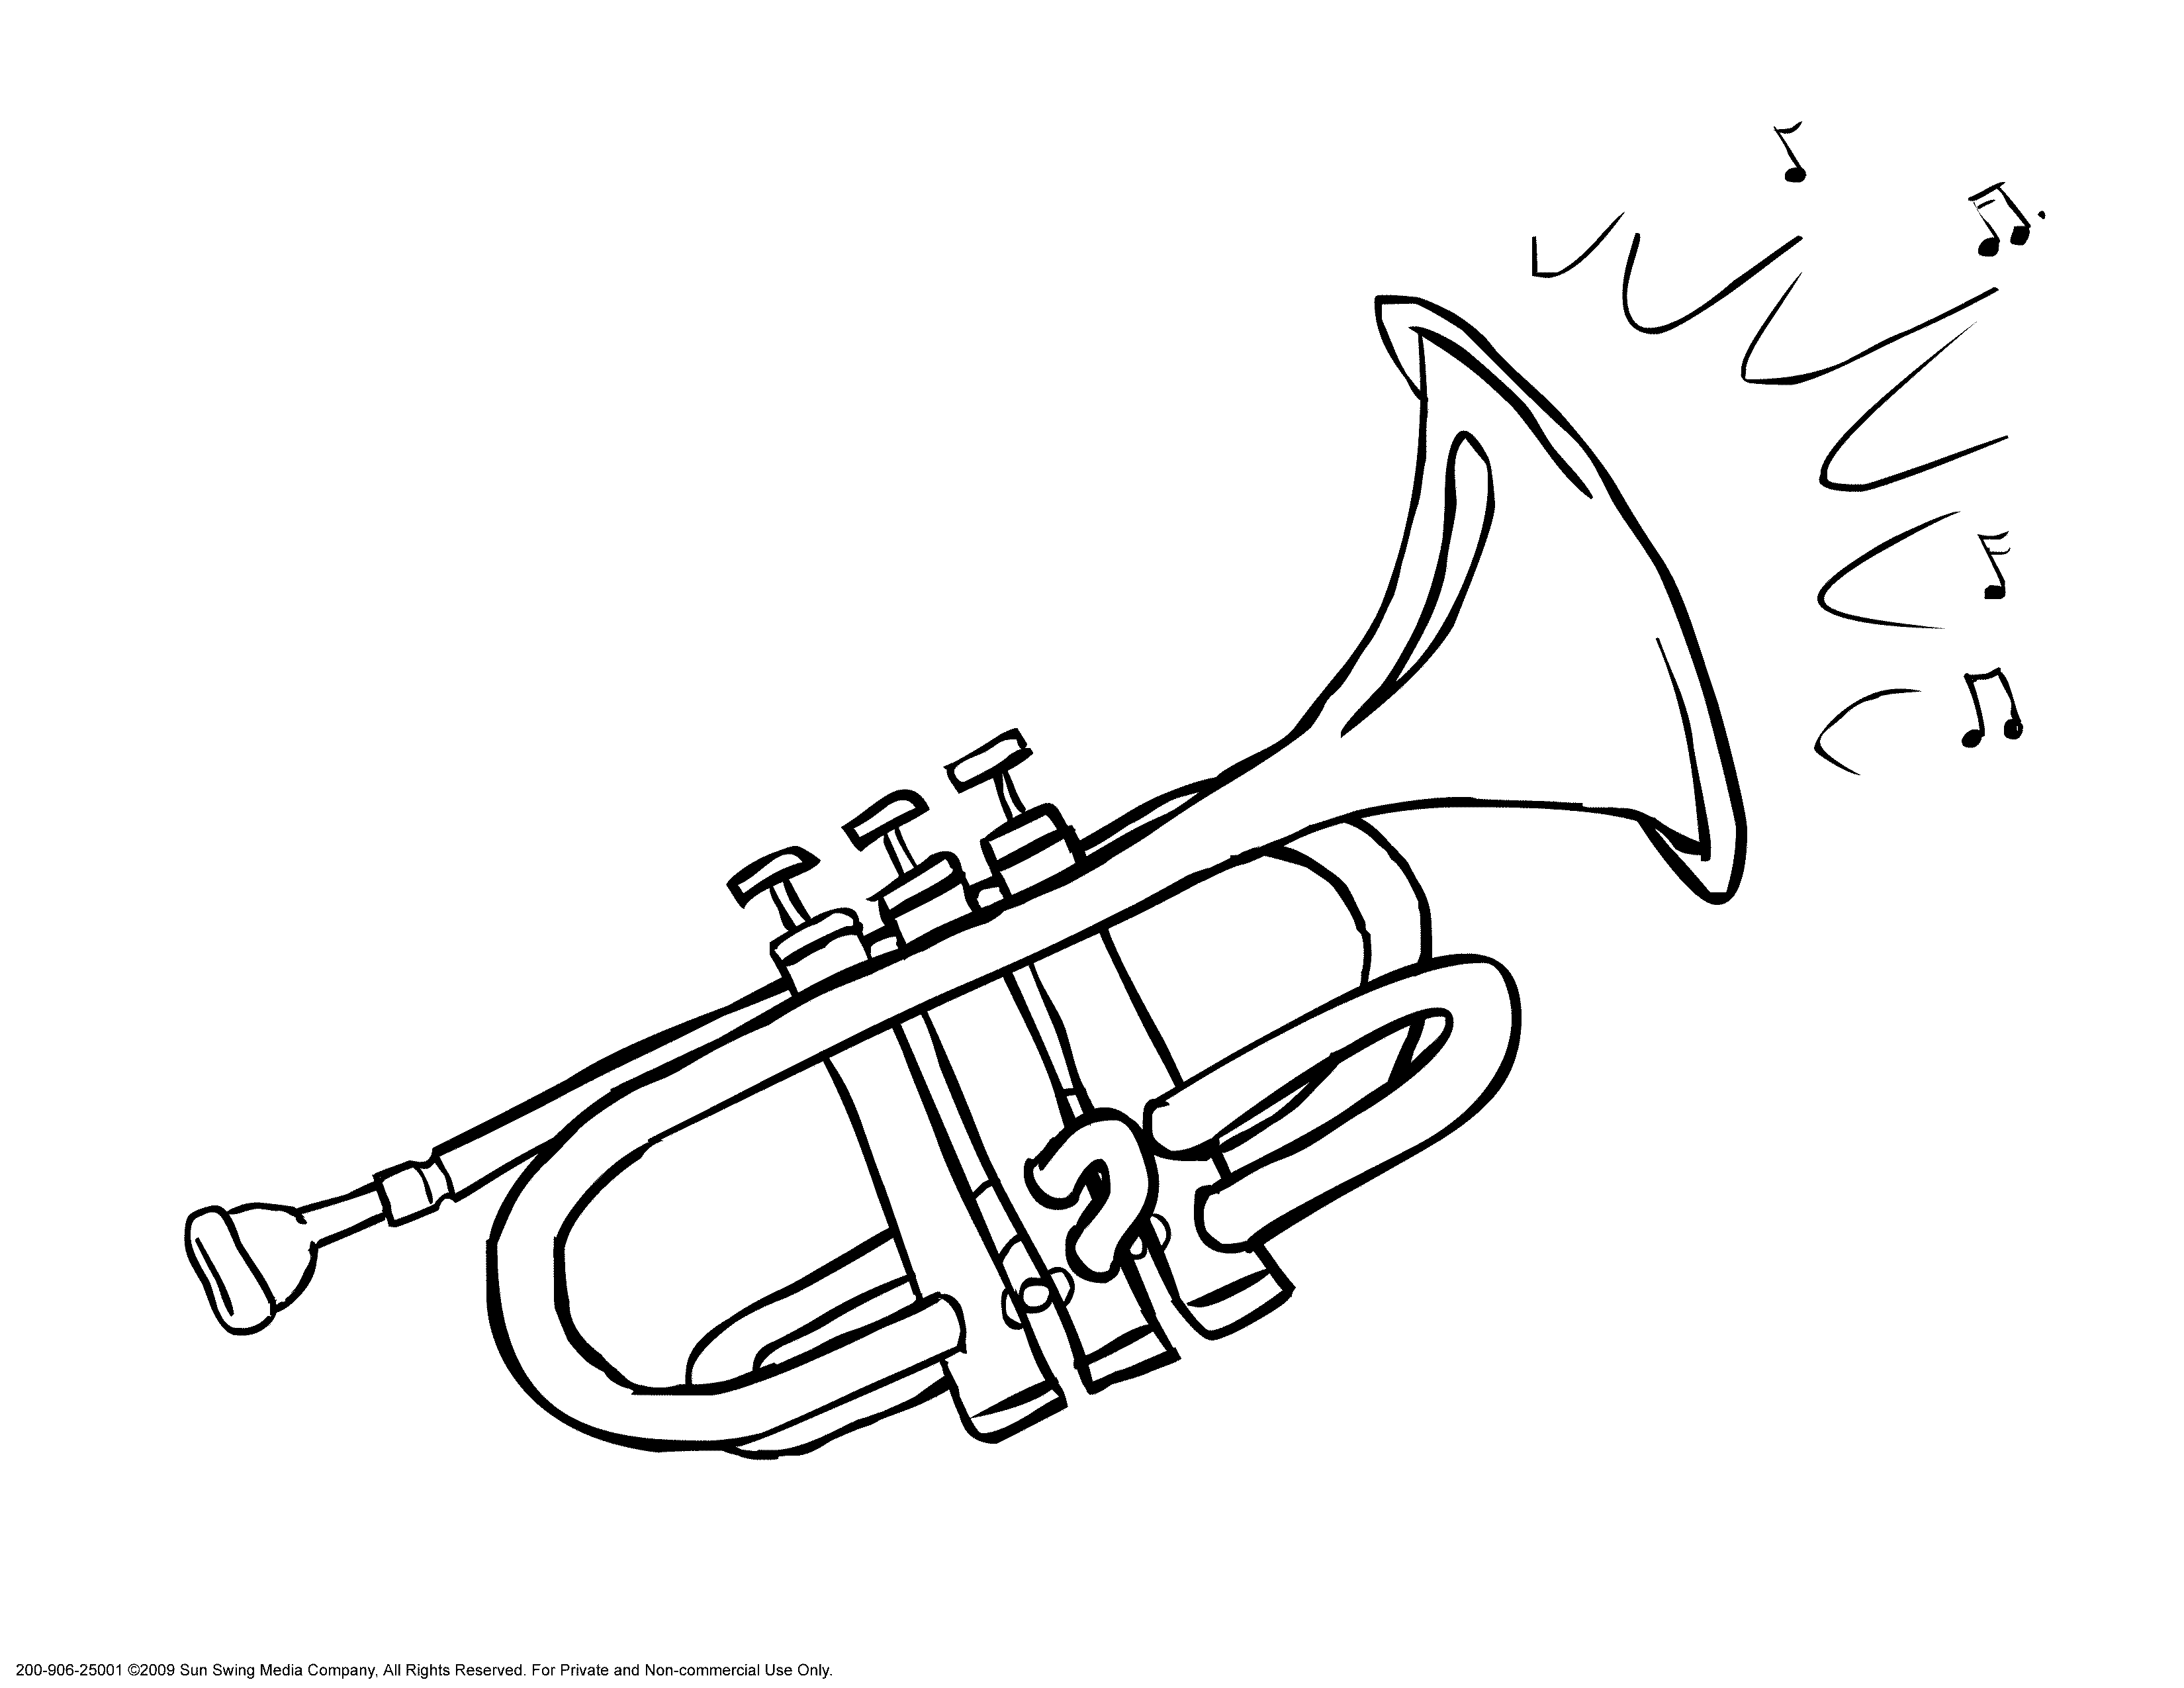 Instrument coloring pages to download and print for free